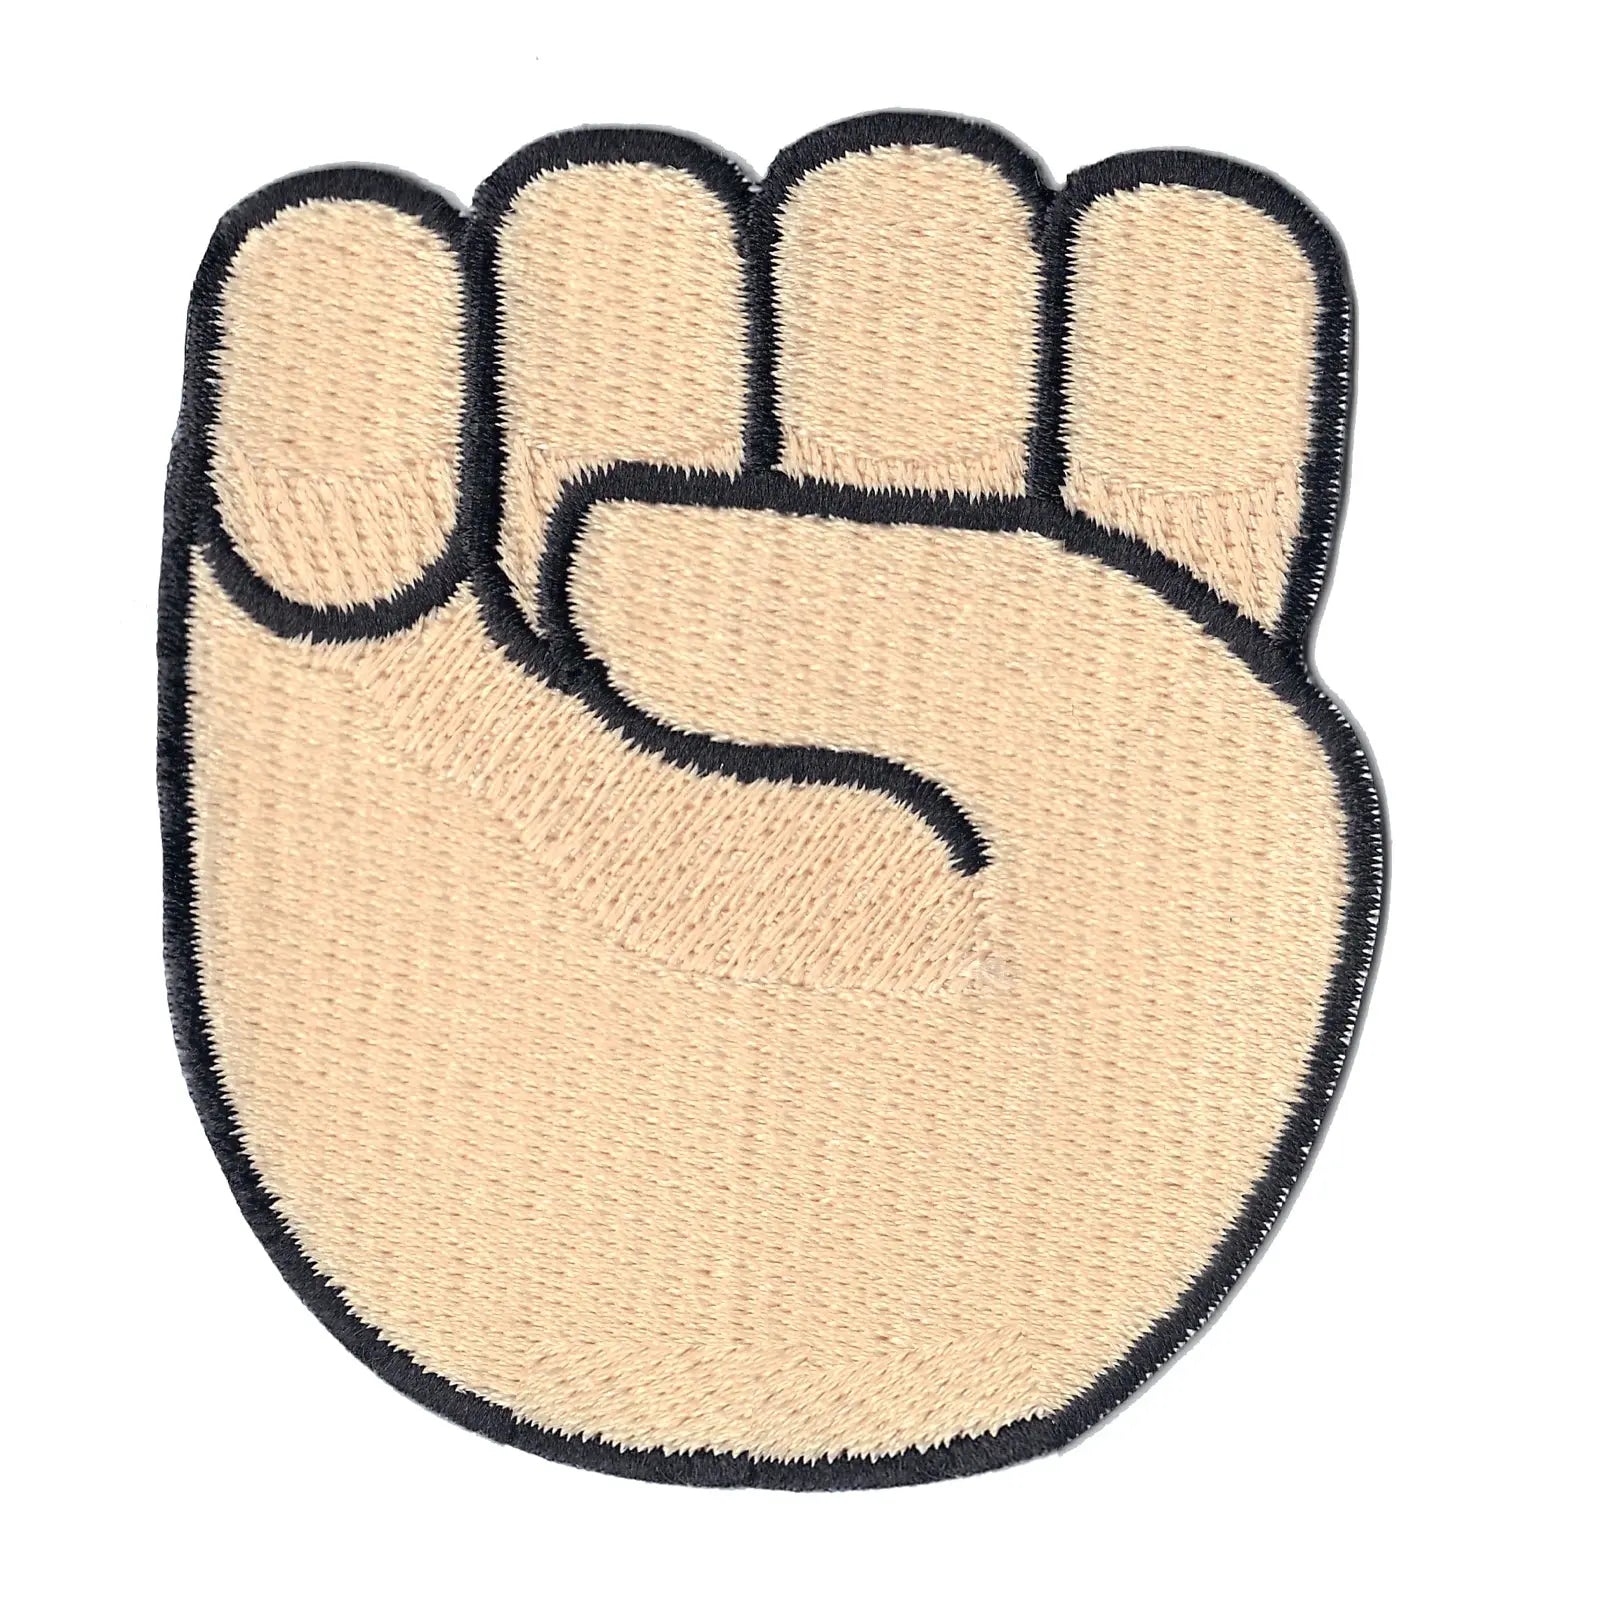 White Fist Emoji Embroidered Iron On Patch 